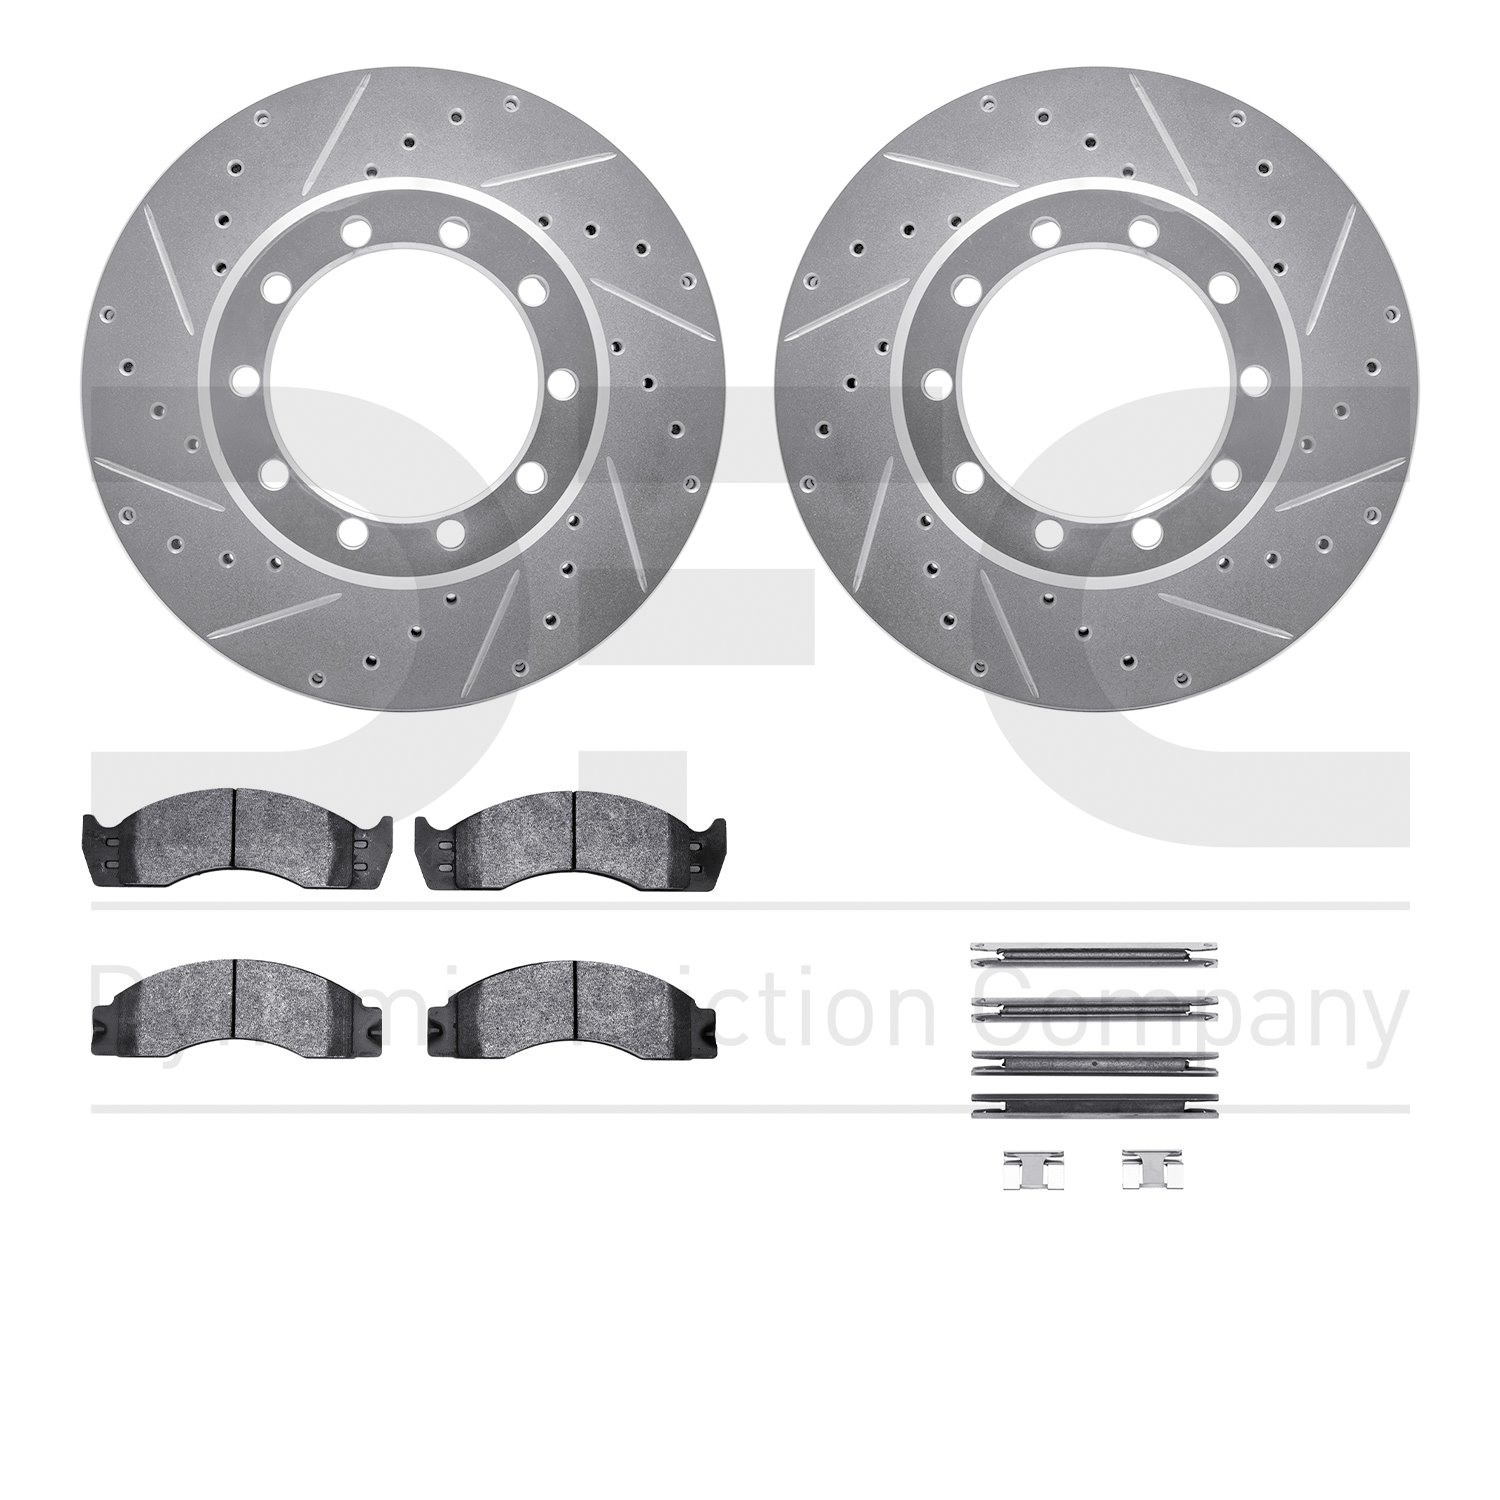 7412-54013 Drilled/Slotted Brake Rotors with Ultimate-Duty Brake Pads Kit & Hardware [Silver], 1988-1998 Ford/Lincoln/Mercury/Ma